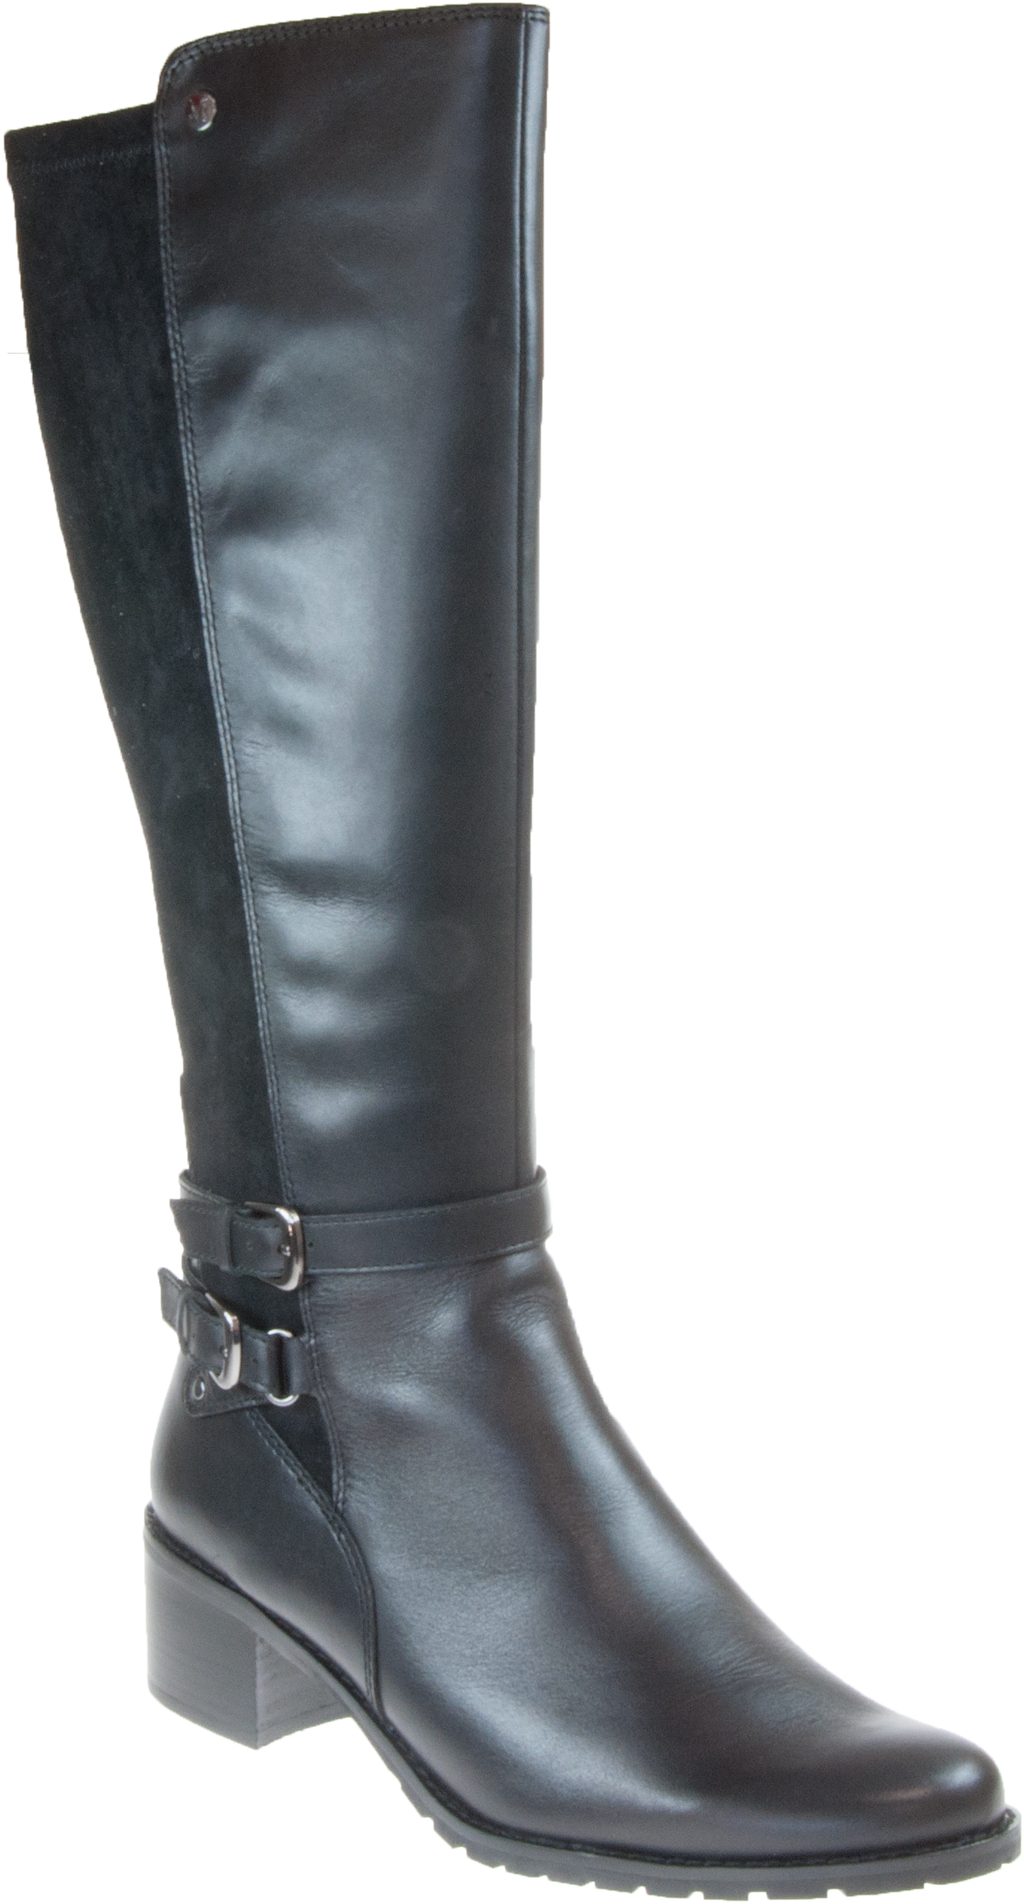 Caprice 25507-25 Black Combination 25507-25 019 - Knee High Boots ...